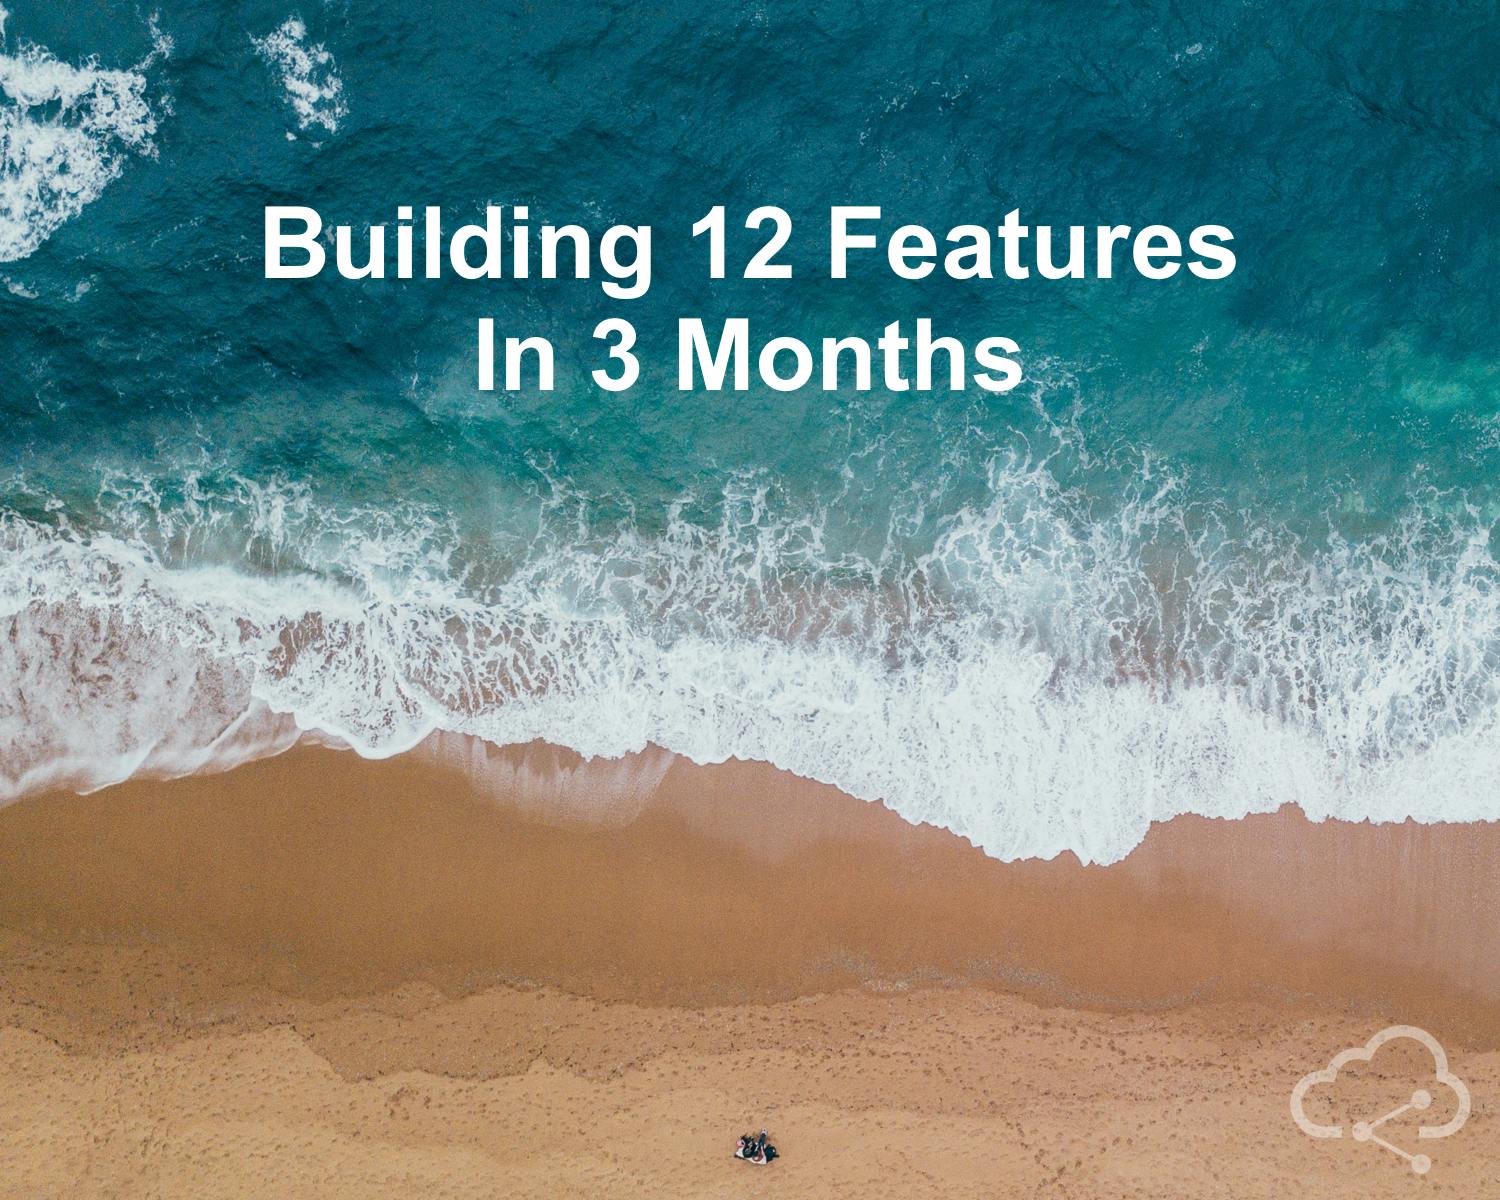 /building-12-features-in-3-months-d3e107f33a4c feature image